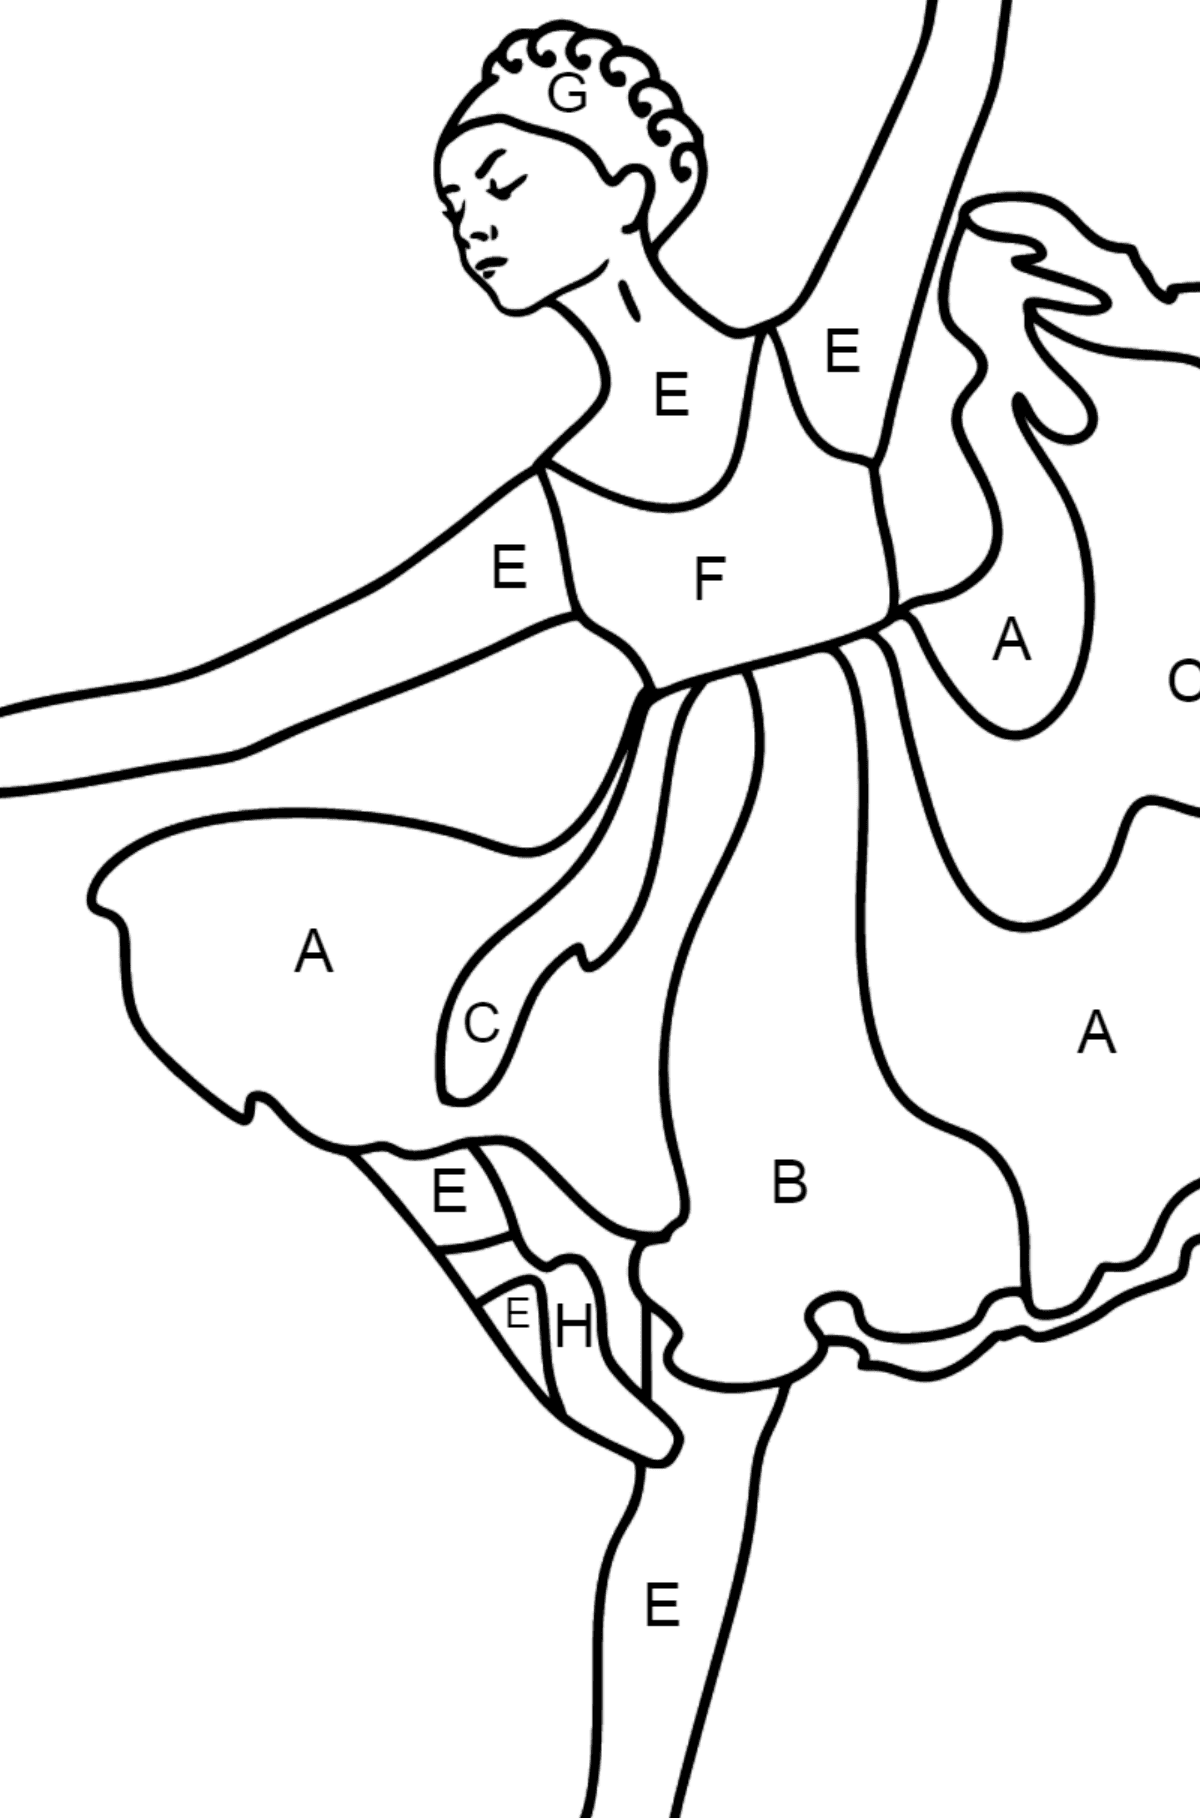 Ballerina in Lilac Dress coloring page - Coloring by Letters for Kids